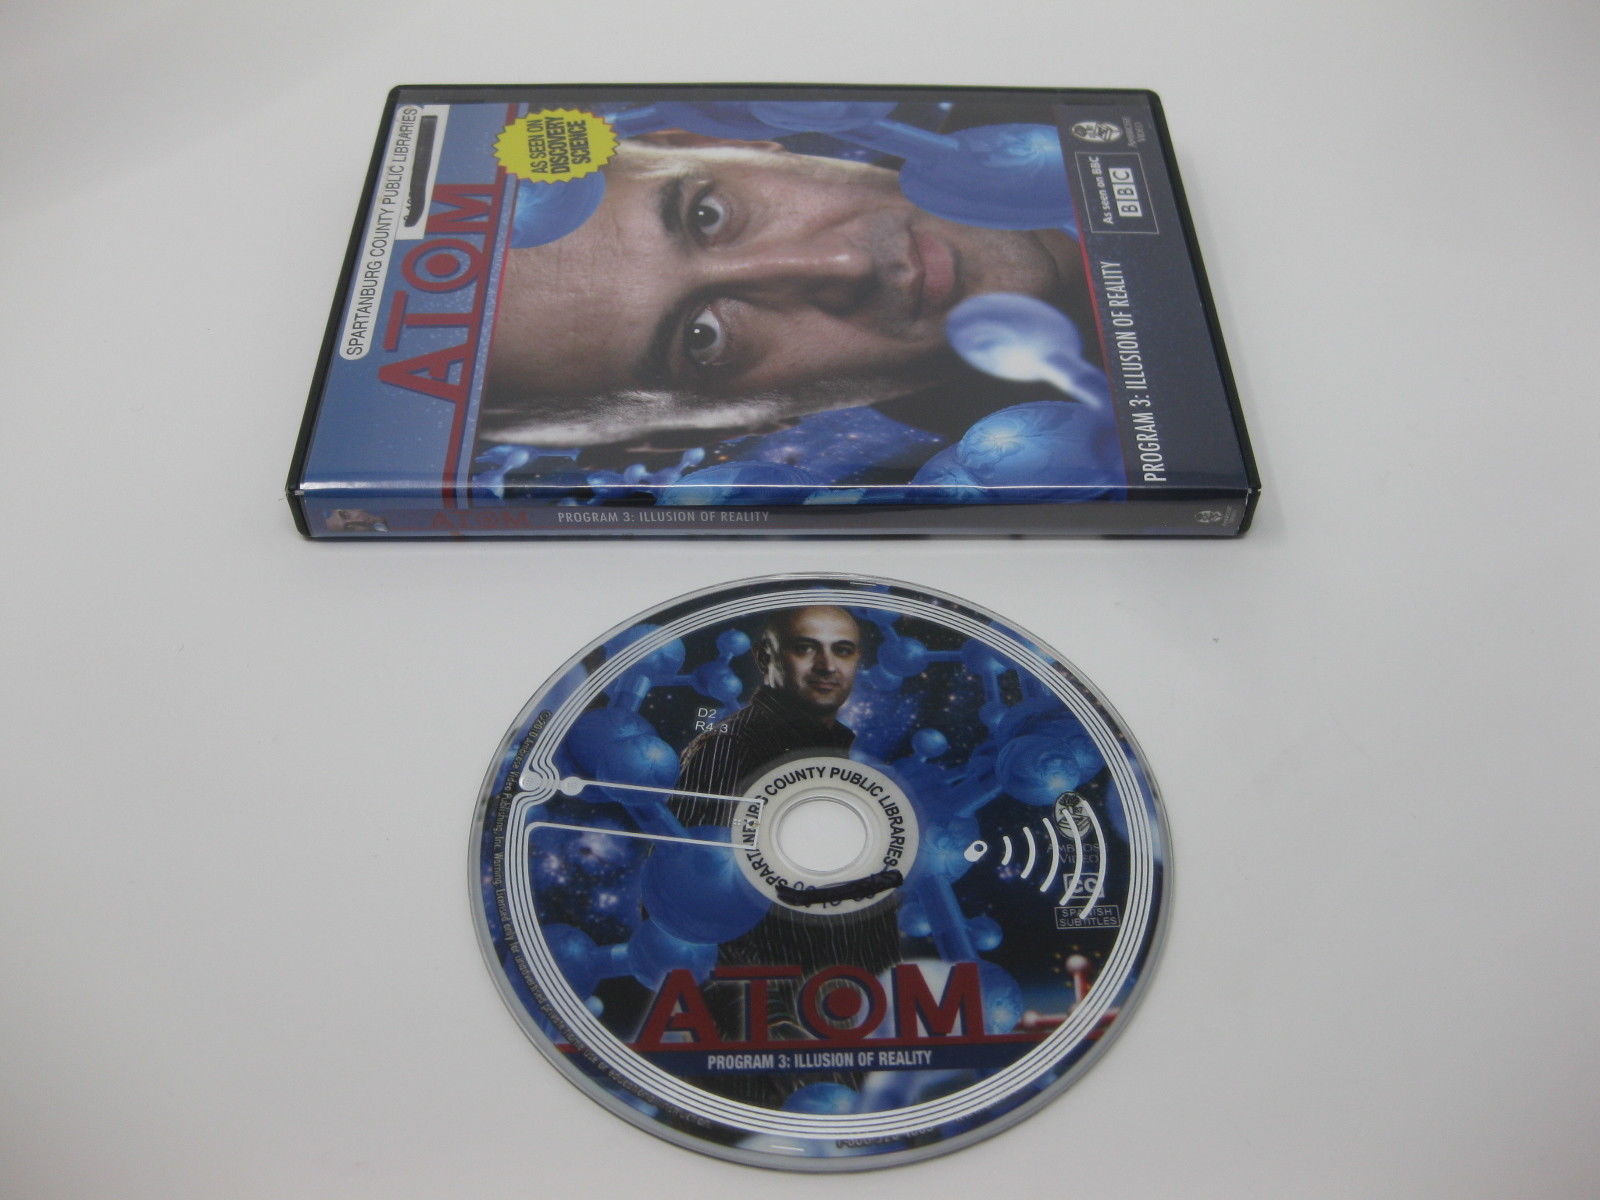 Atom Program 3: Illusion Of Reality DVD As Seen on BBC Discovery Science Ambrose - $29.99